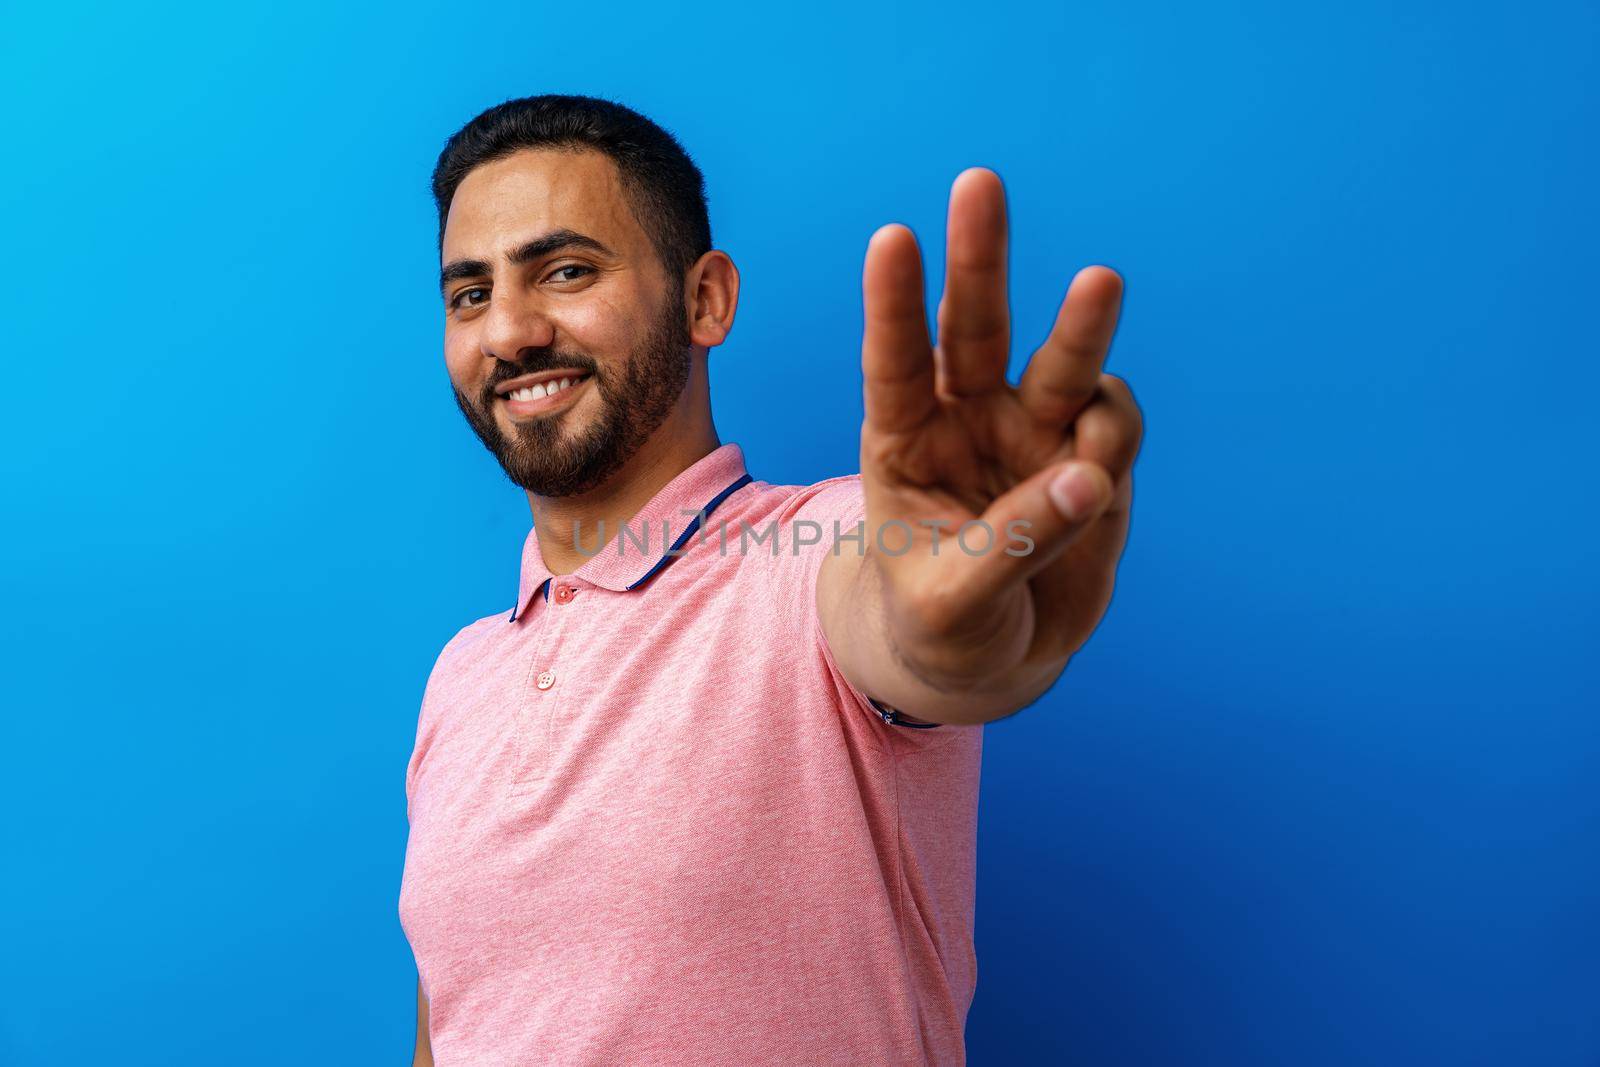 Young arabian man smiling and showing three fingers against blue background, close up